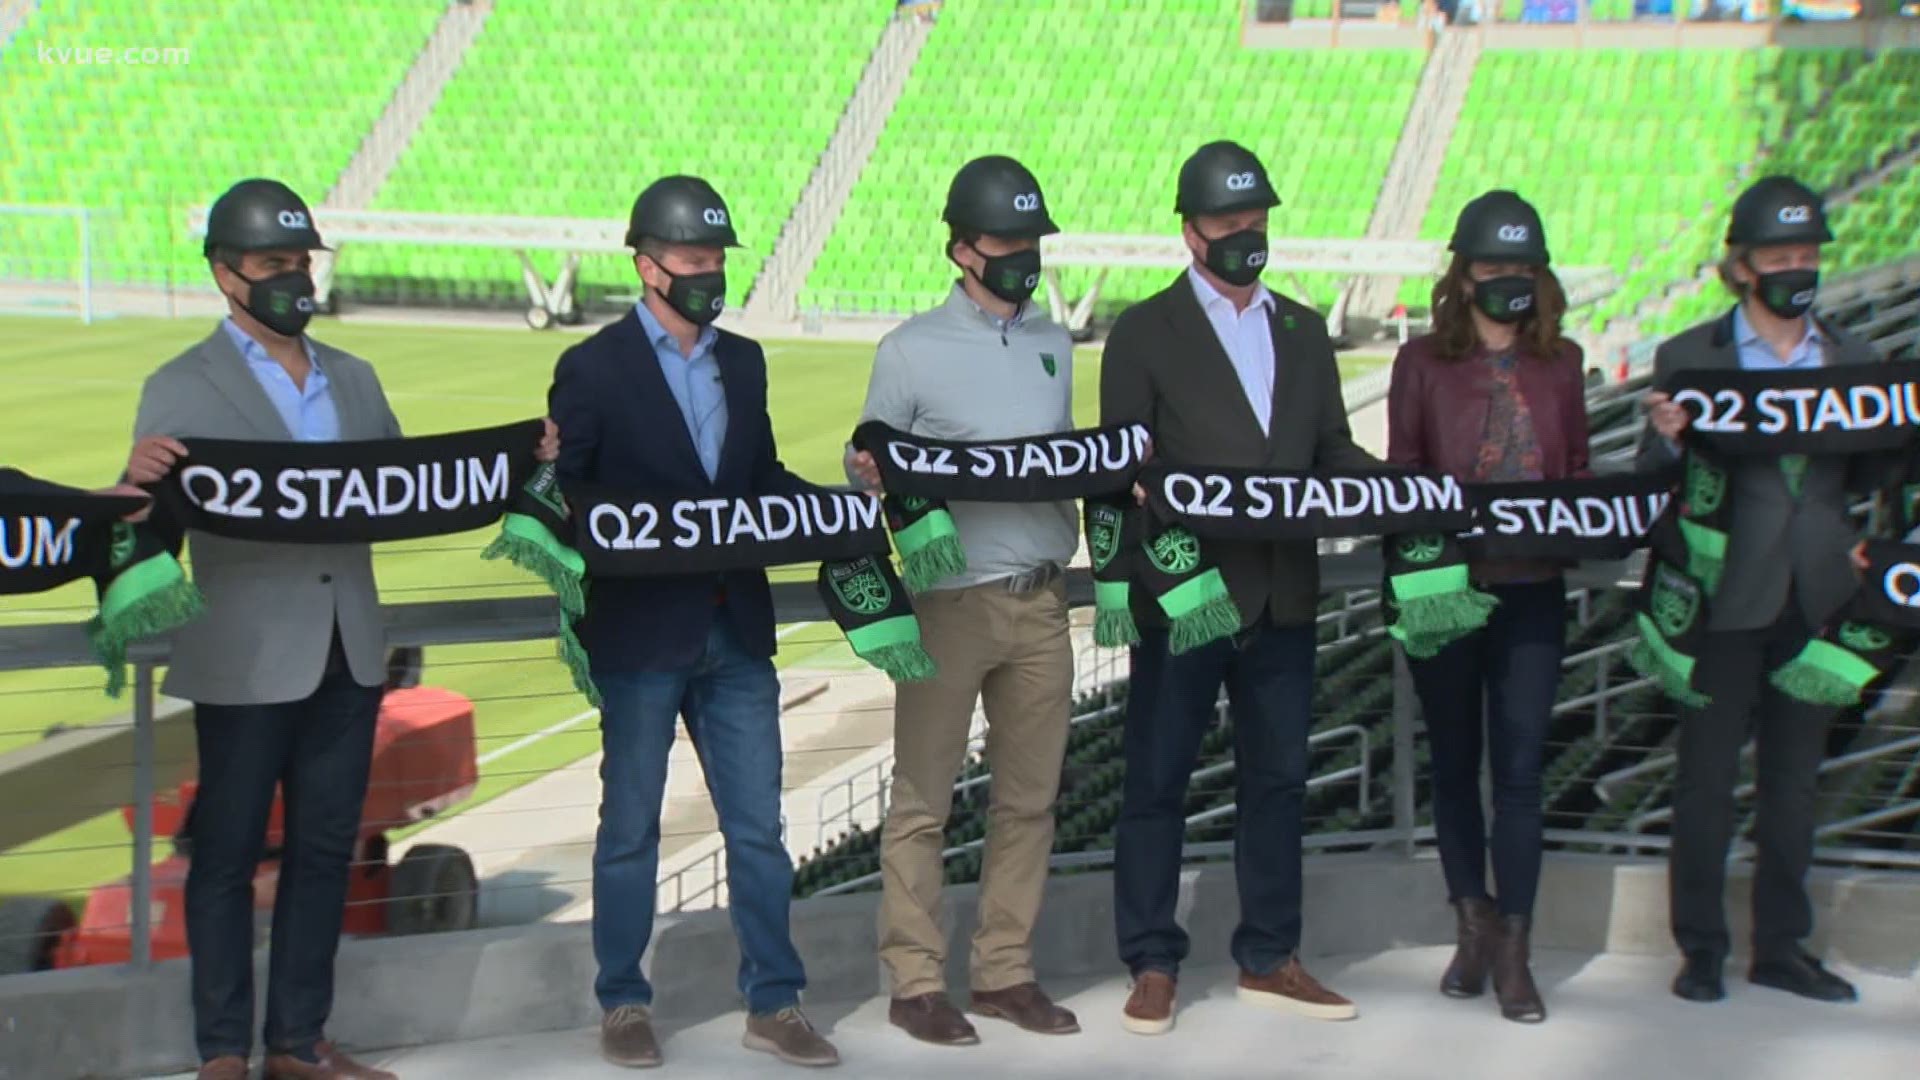 It's official: Austin FC's stadium will be called Q2 Stadium. The stadium's naming rights partner is Q2 Solutions, a digital banking company headquartered in Austin.